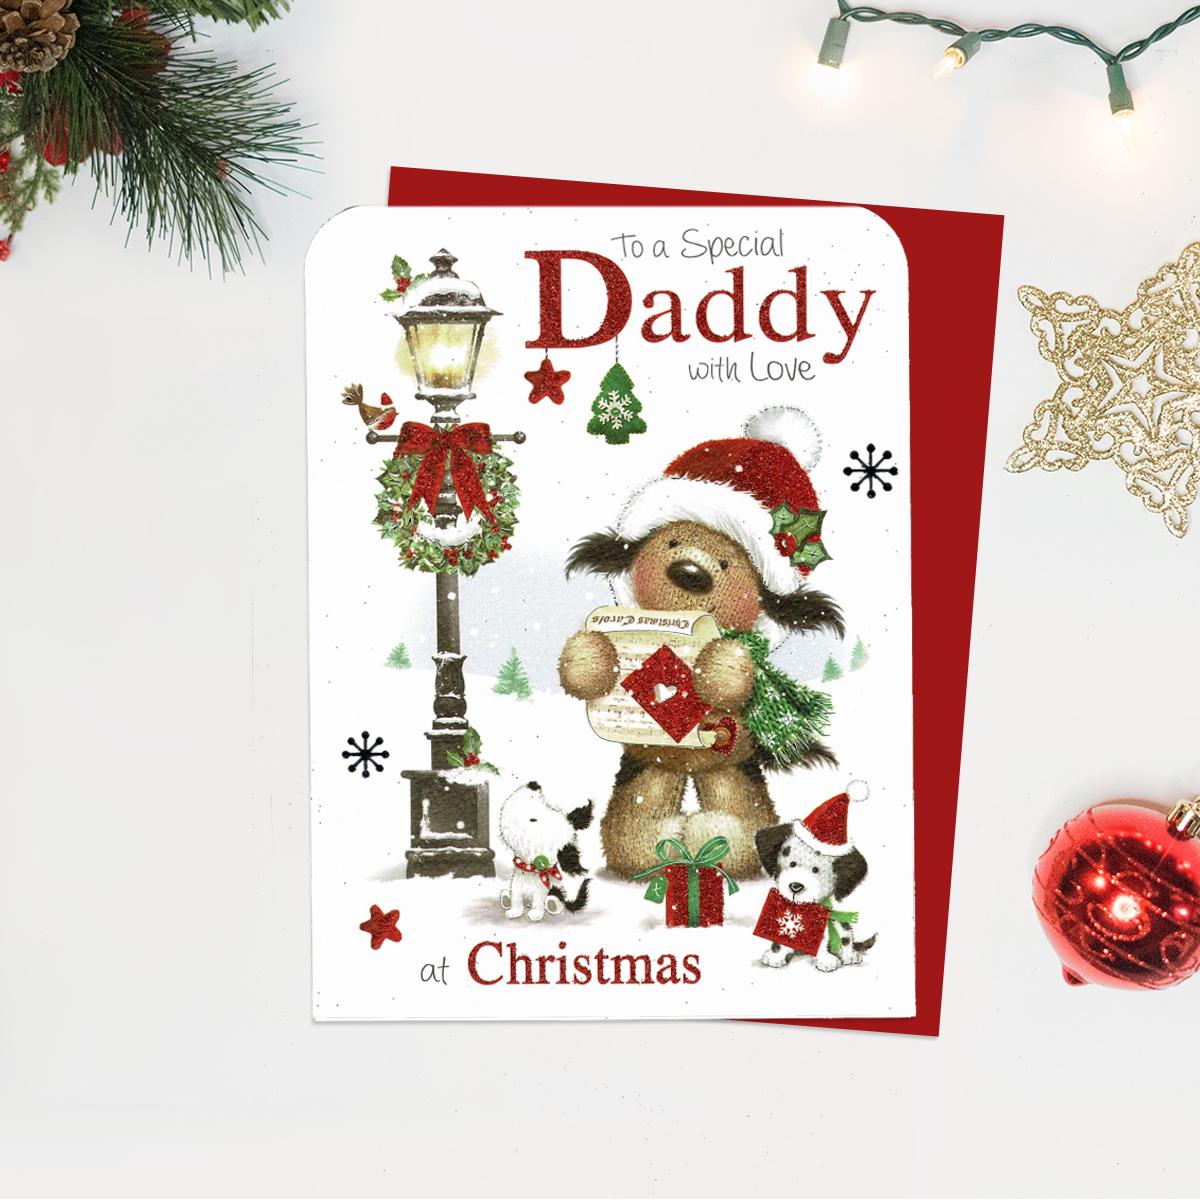 Special Daddy Christmas Card Showing Animal Carol Singers. Red Glitter Lettering And Red Envelope Complete The Design